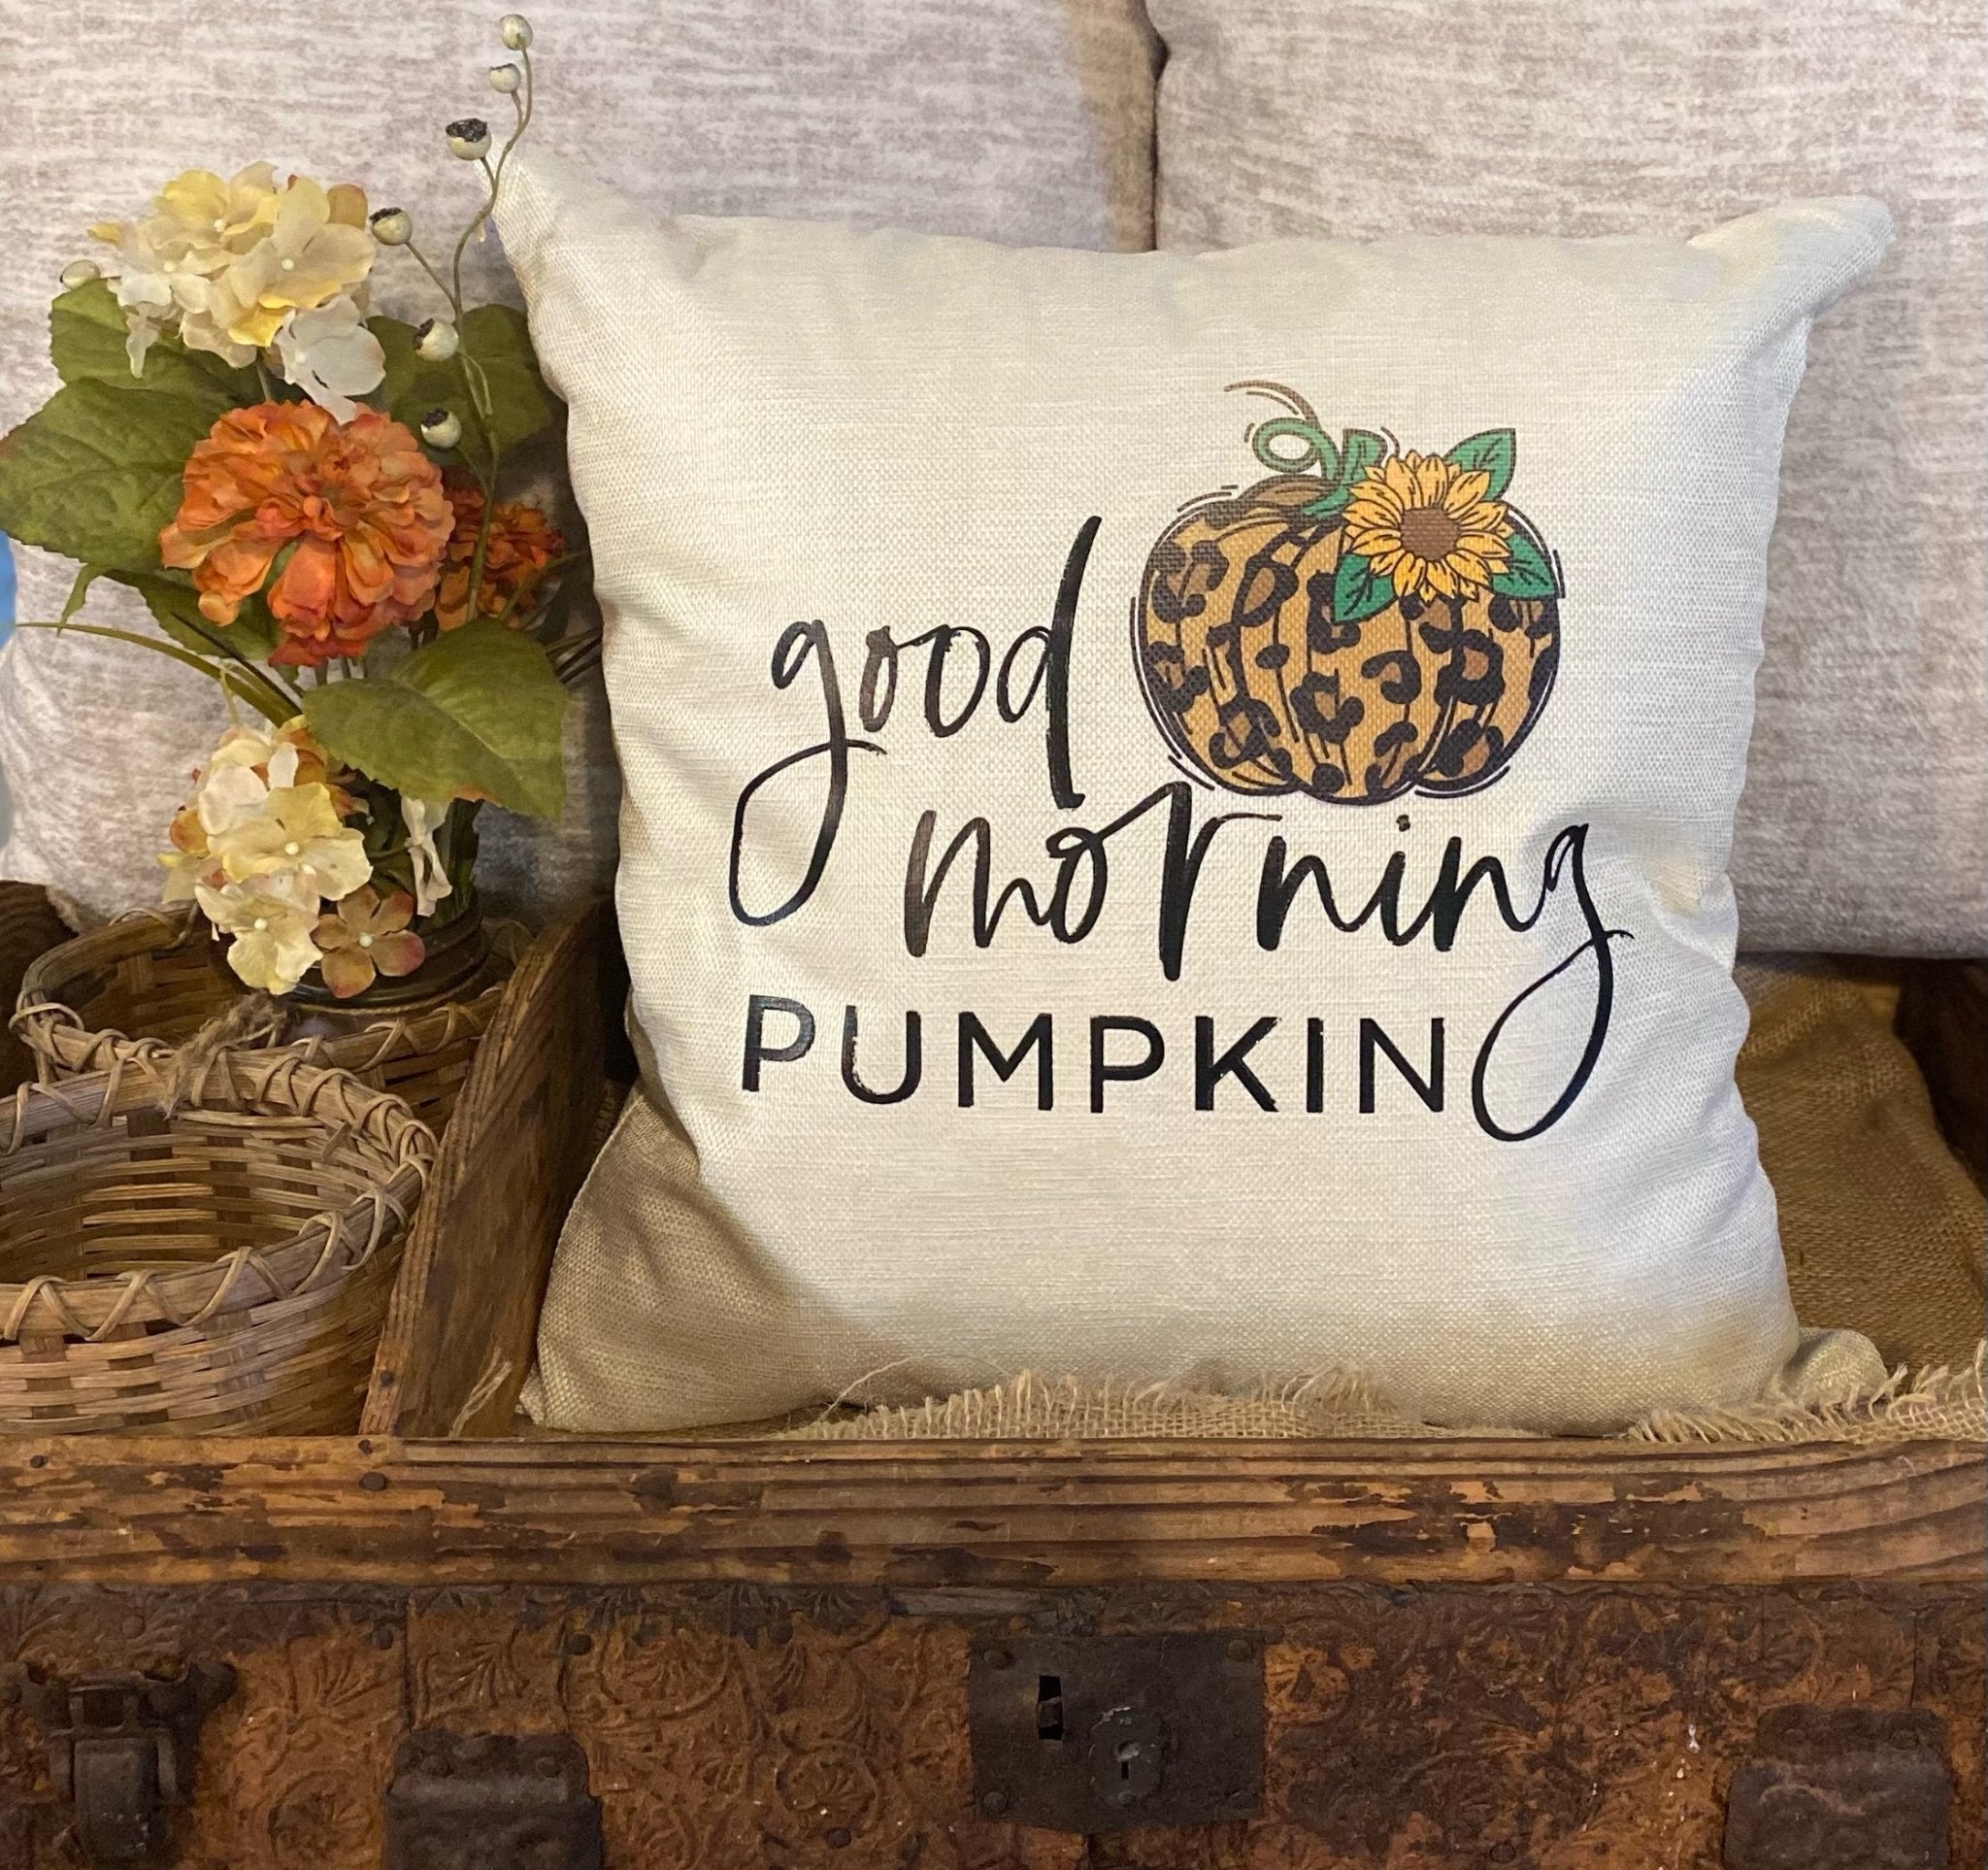 Good Morning Pumpkin Sublimated Pillow Cover - Trendznmore